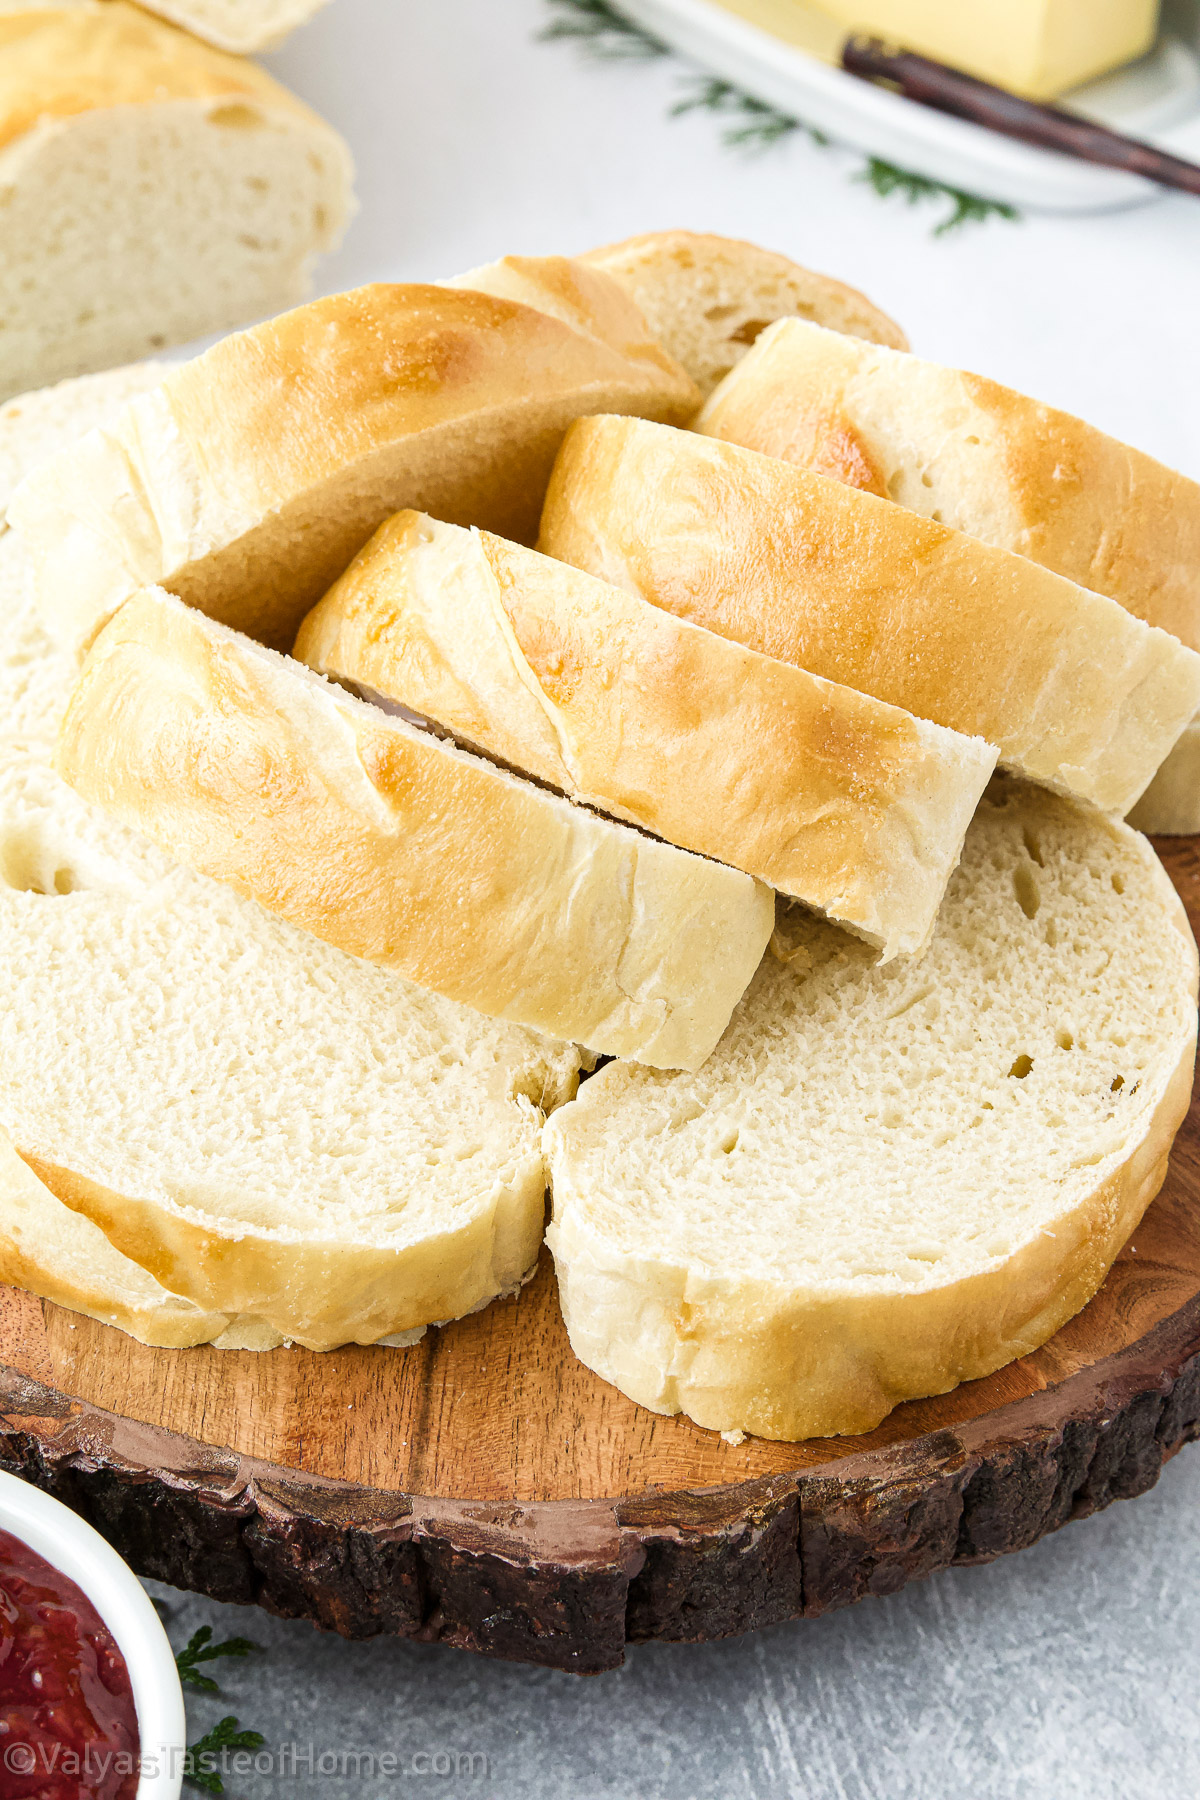 French bread is the delicious white loaf of crisp bread that we’ve all come to love. It’s, by far, one of the most versatile bread you can make and goes with just about everything!